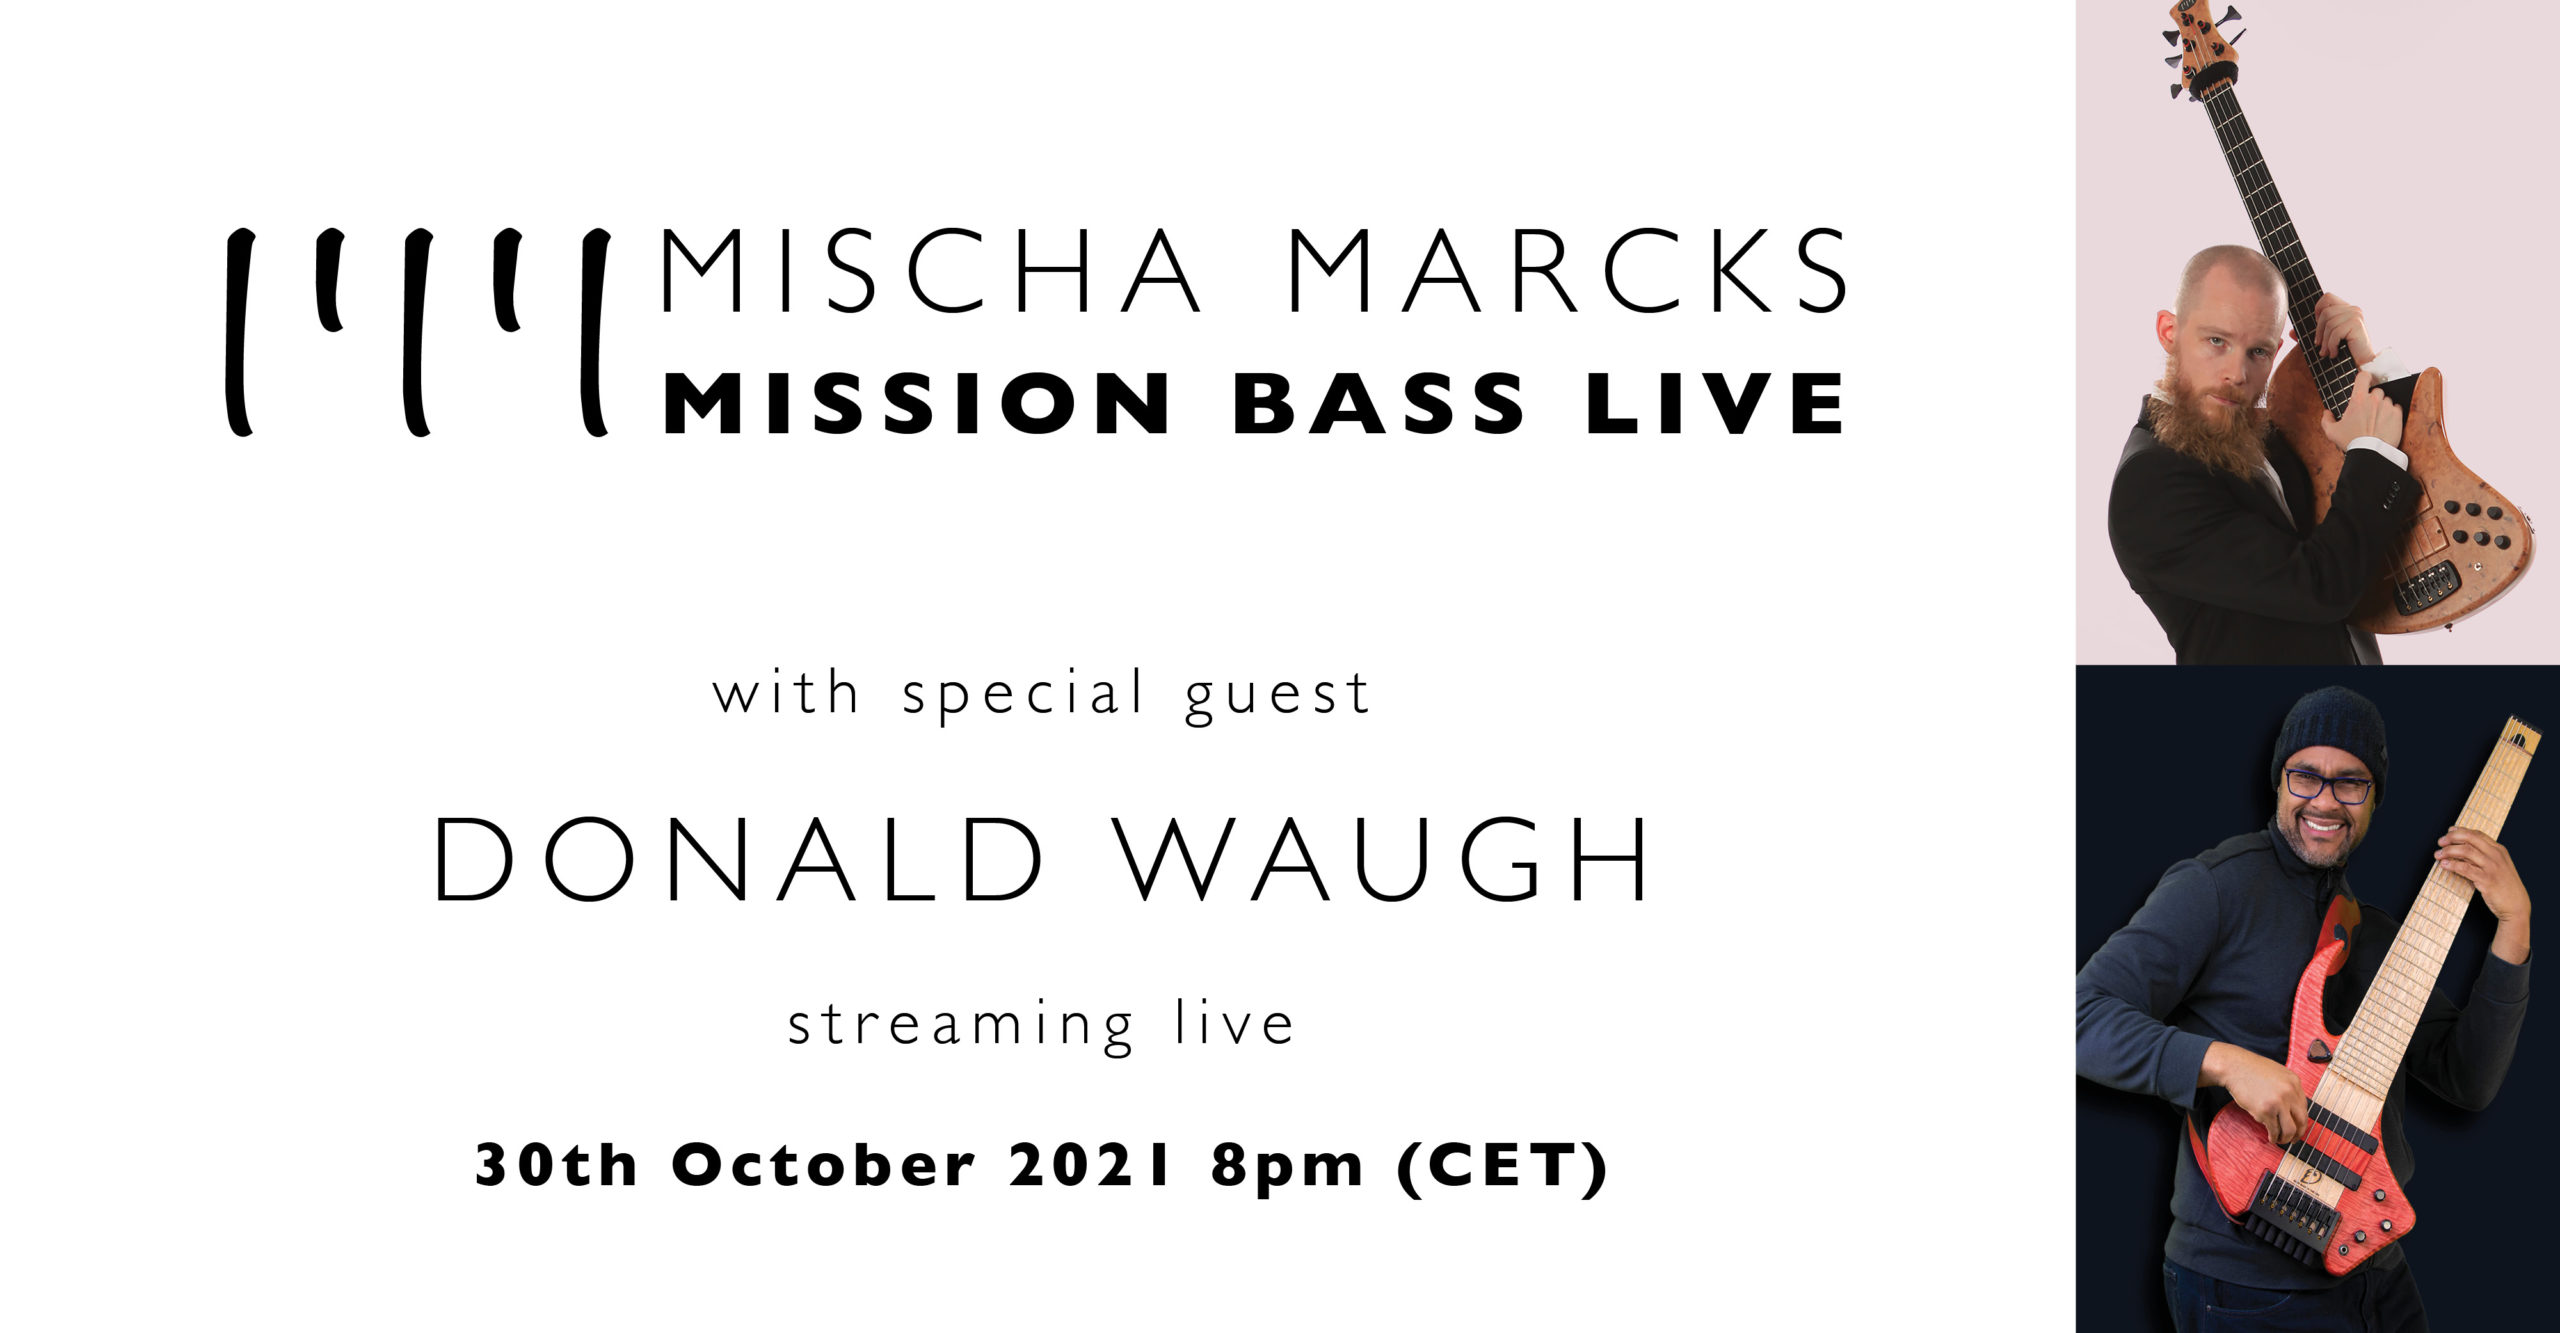 MISSION BASS LIVE with special guest Donald Waugh